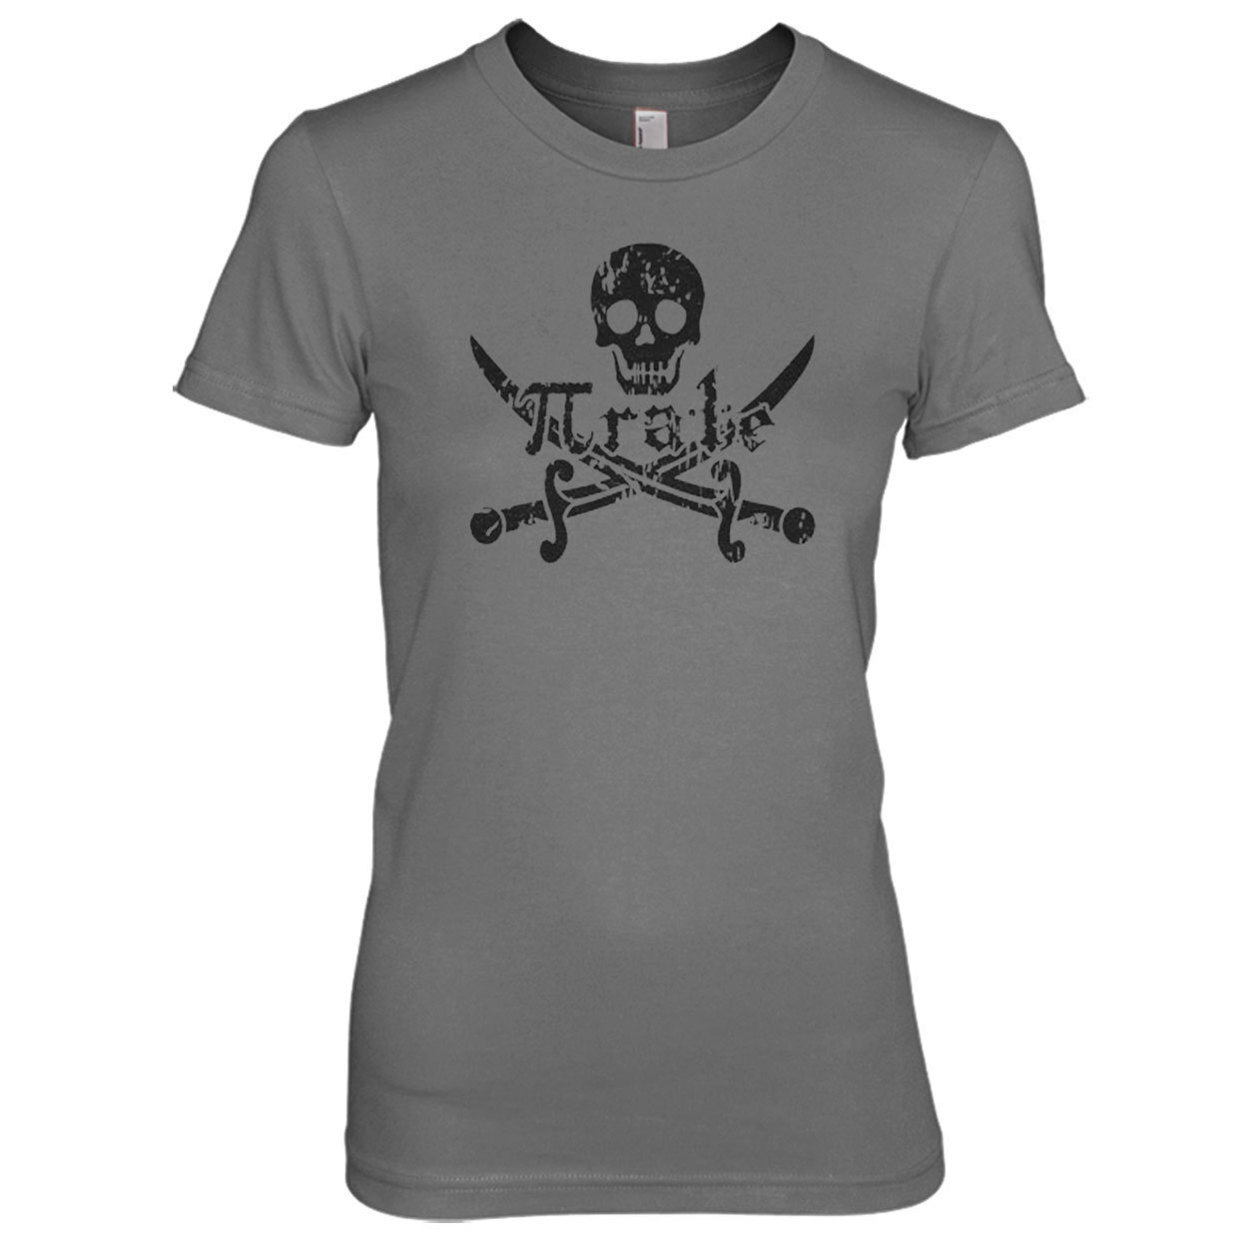 Buy Pi-rate Pirate Funny Math Shirt Vintage Cool Tee by Crazy Dog ...